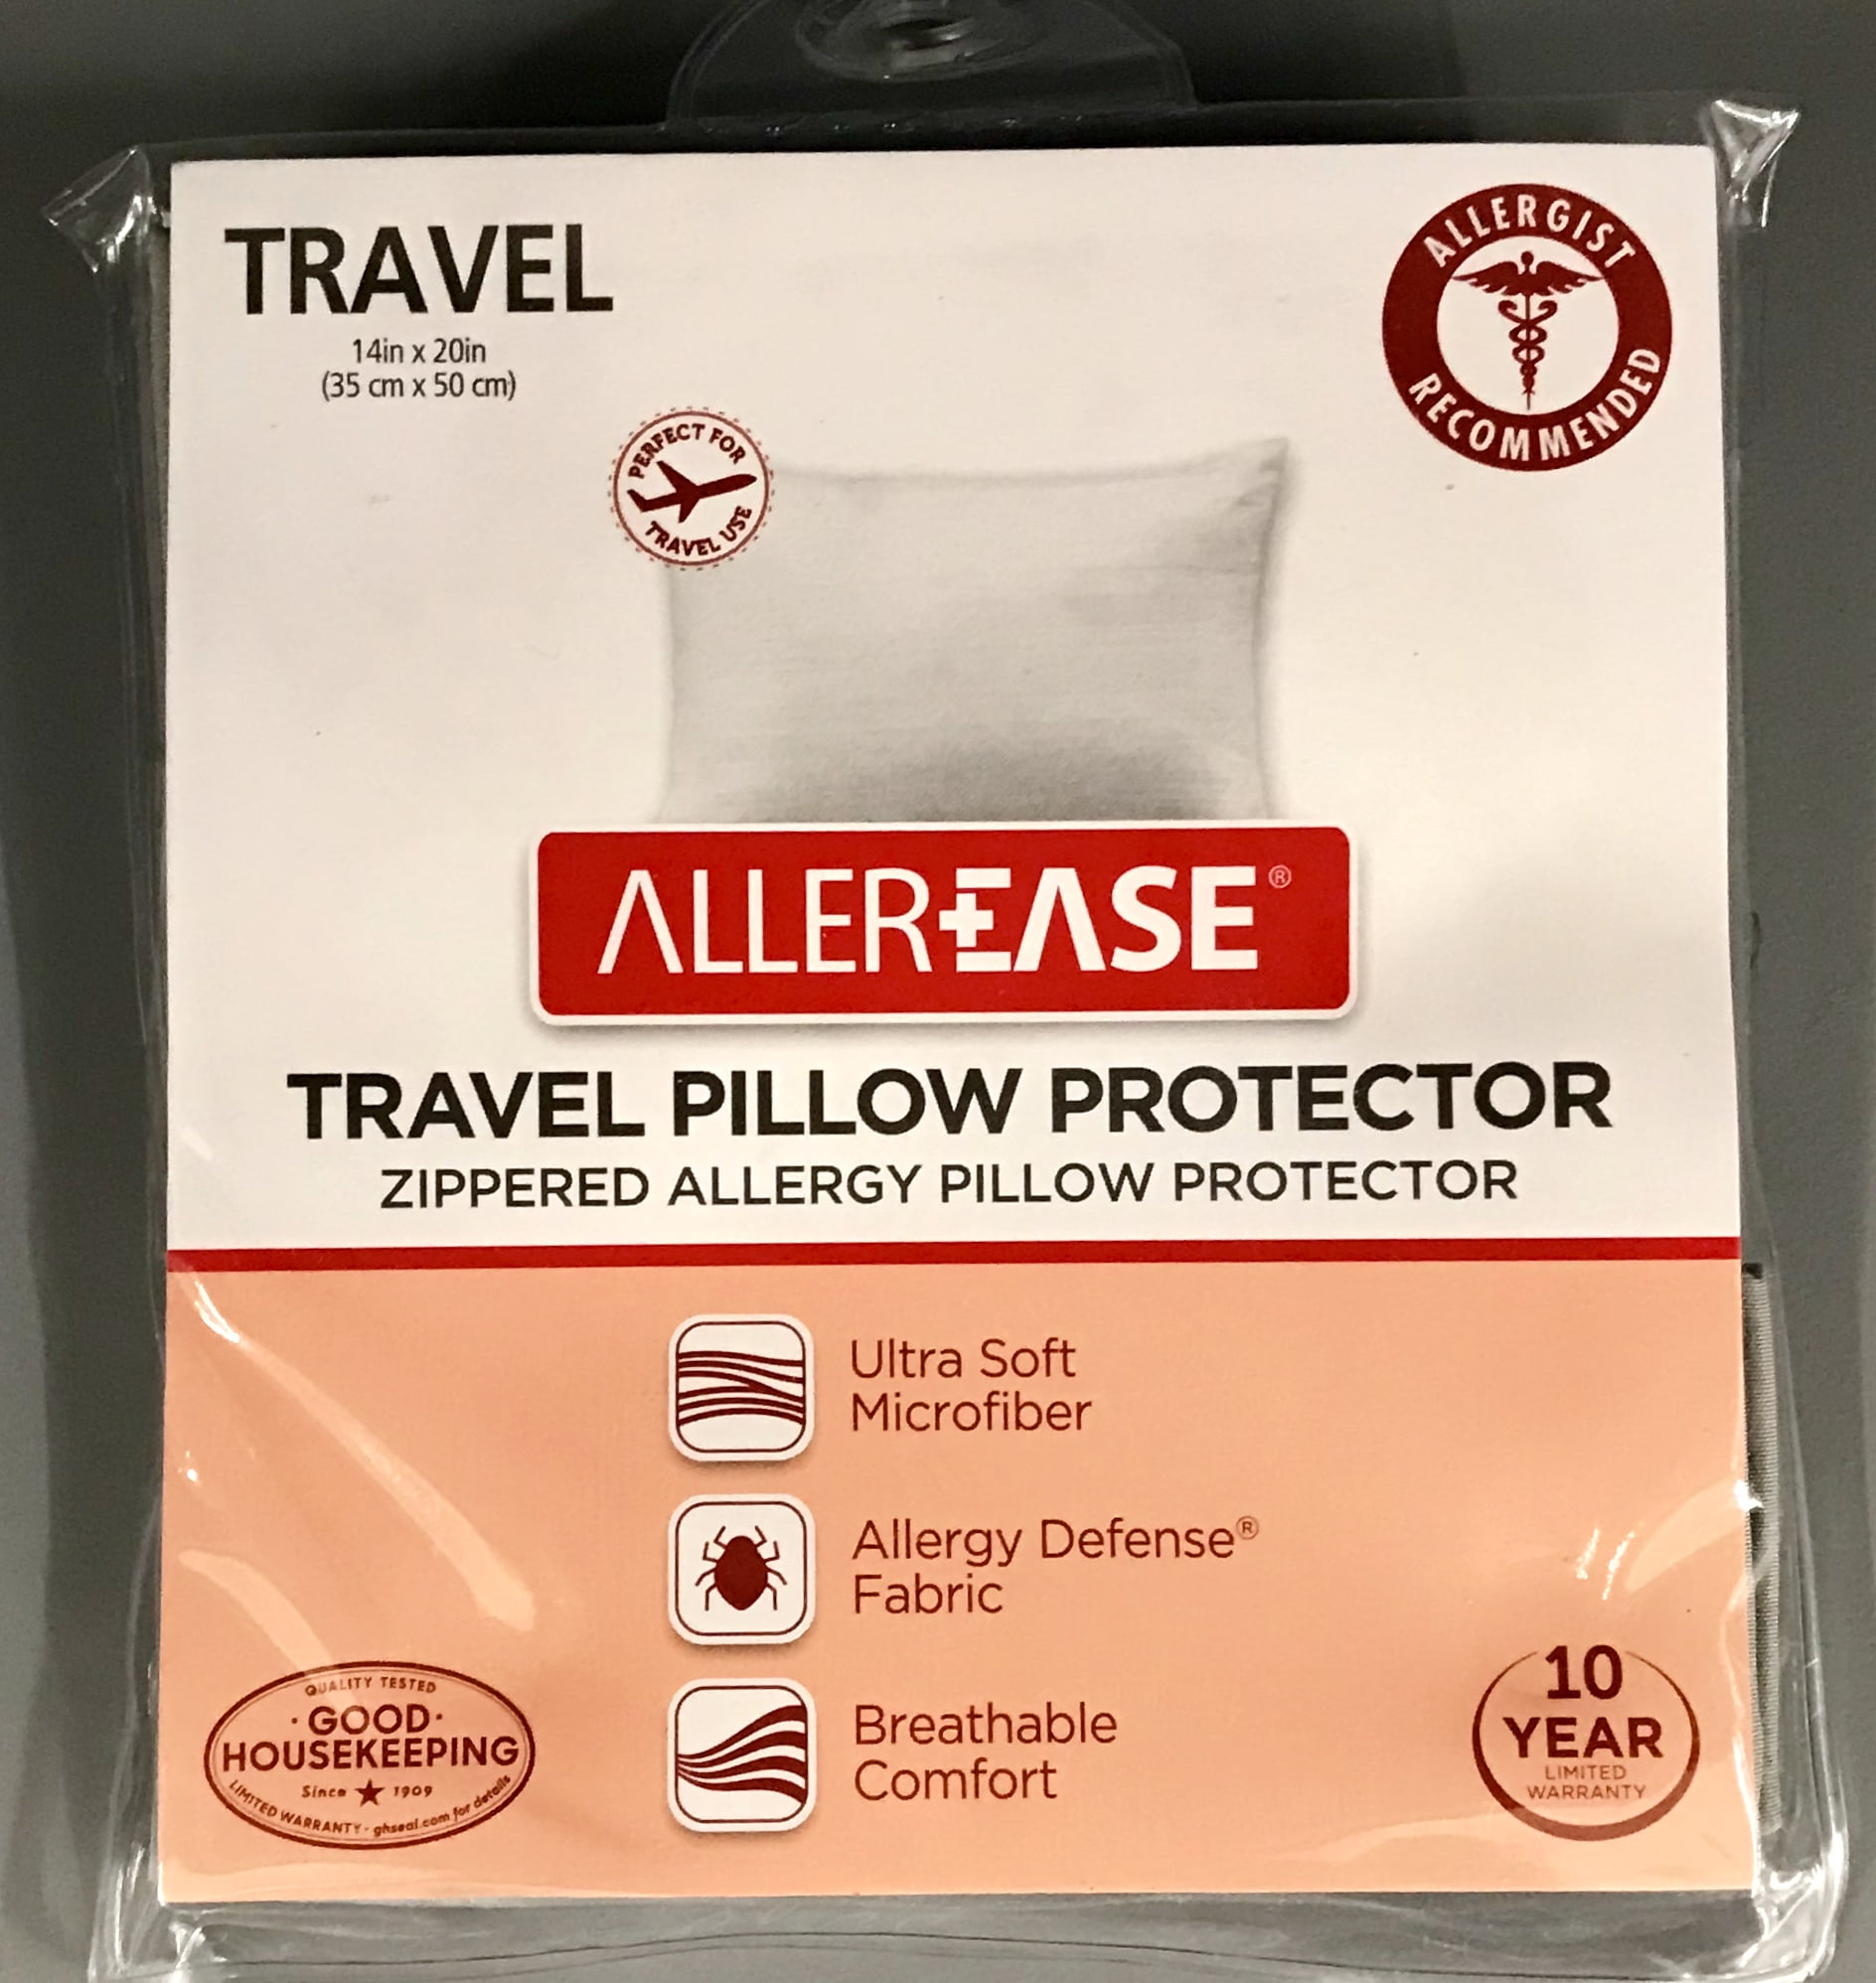 allerease travel pillow protector